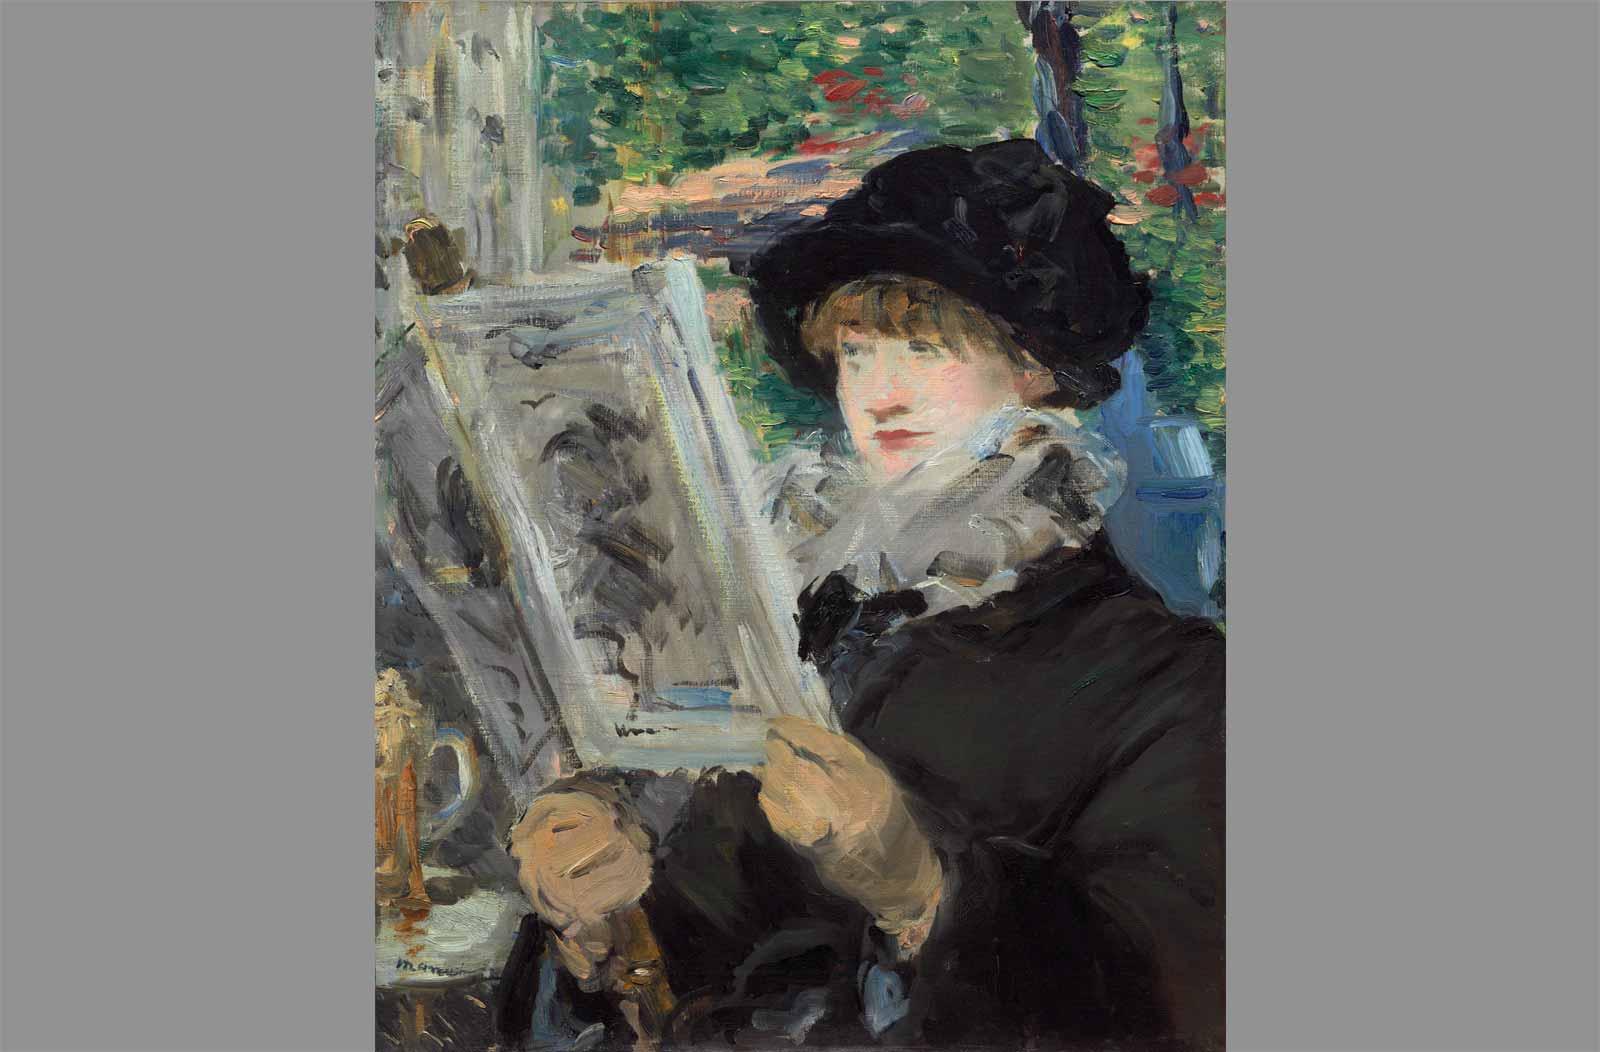 Édouard Manet. Woman Reading, 1880 or 81.